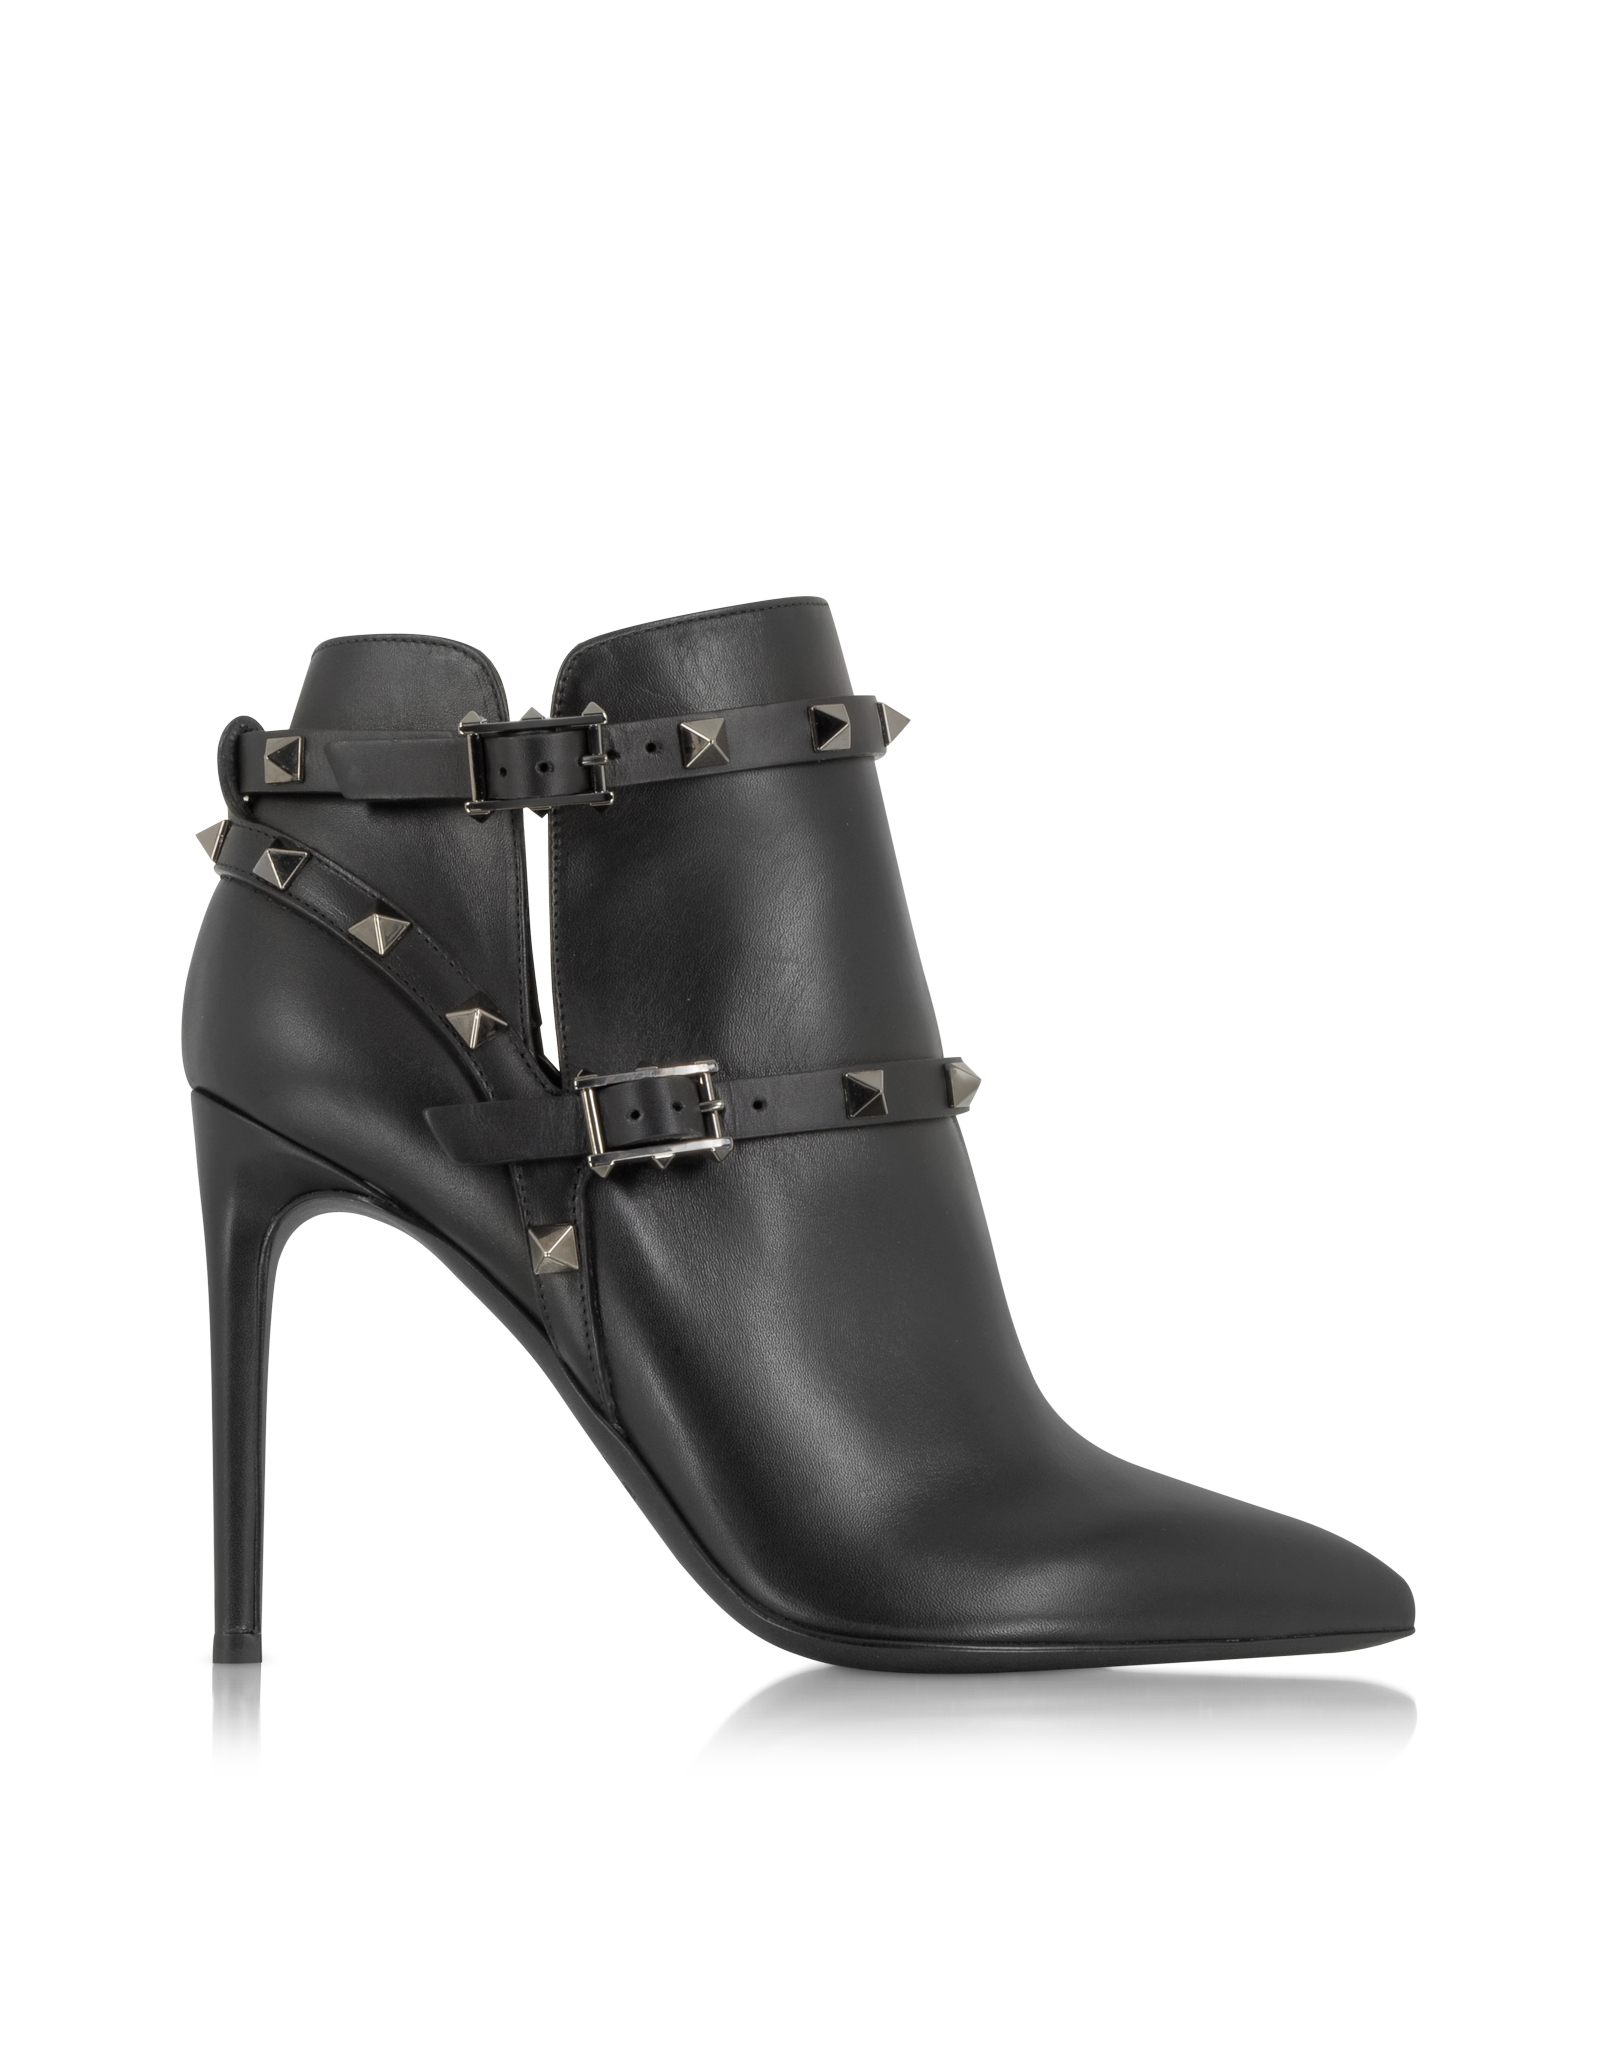 Lyst - Valentino Rockstud Noir Leather Ankle Boot in Black